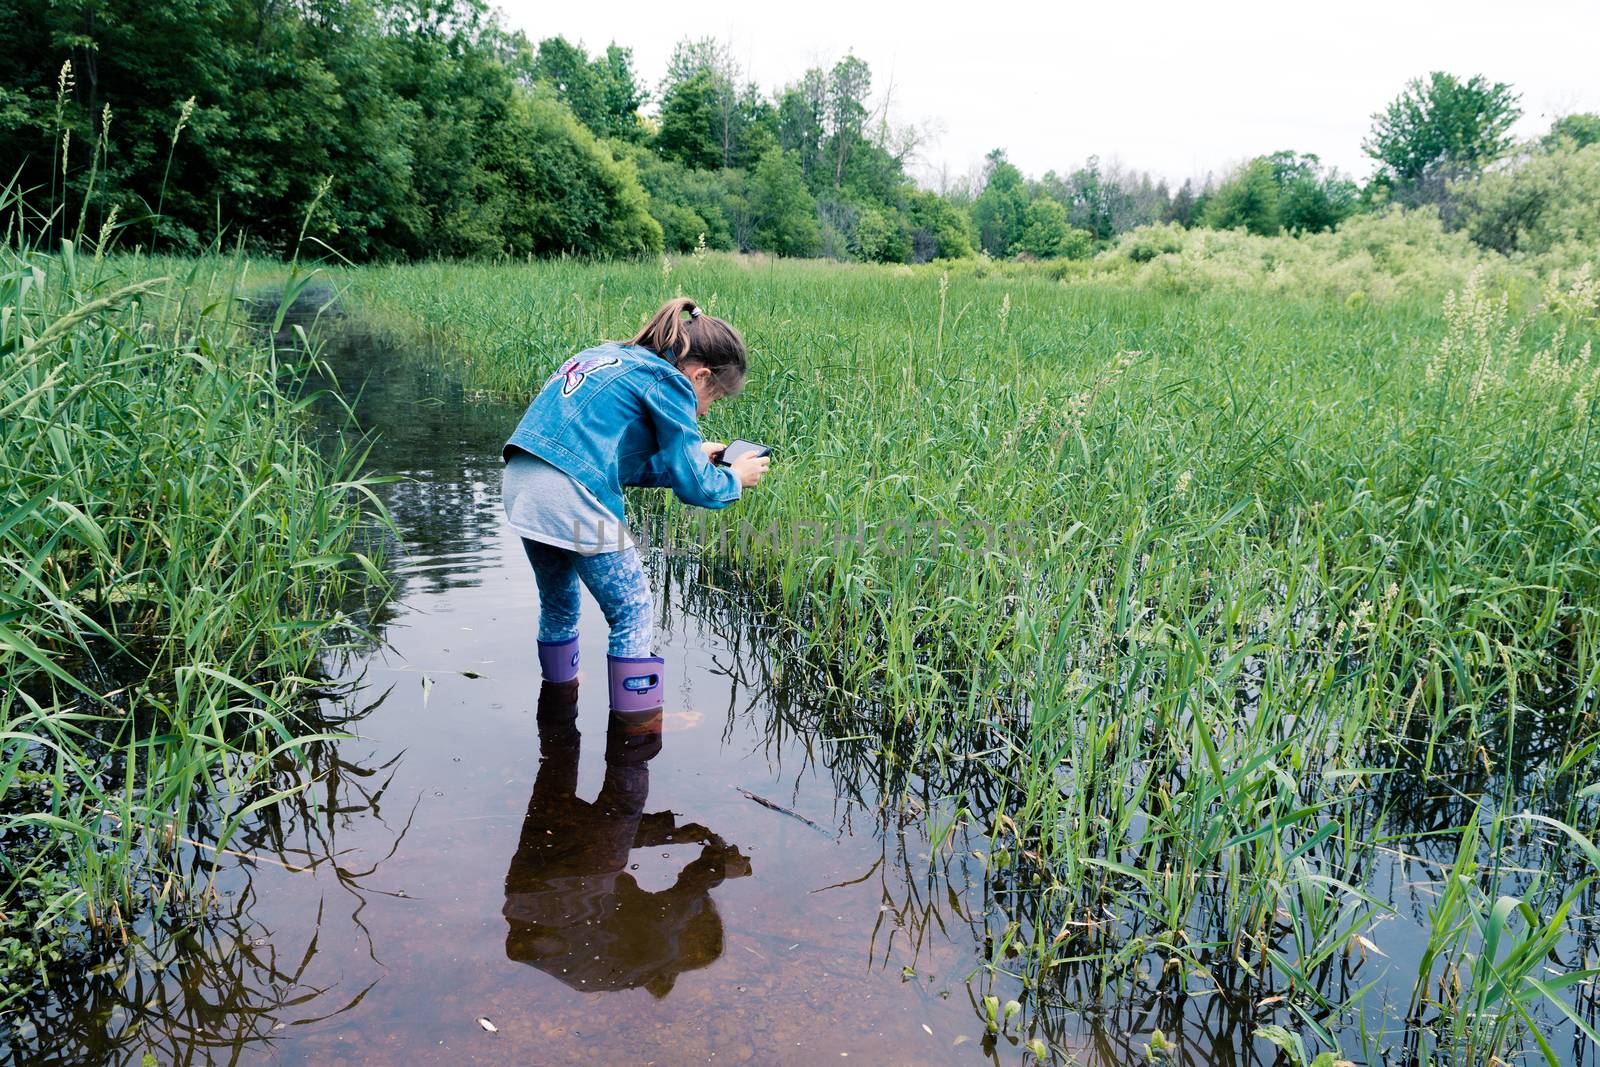 A girl takes pictures of a frog that hides in a thicket of grass on a swamp